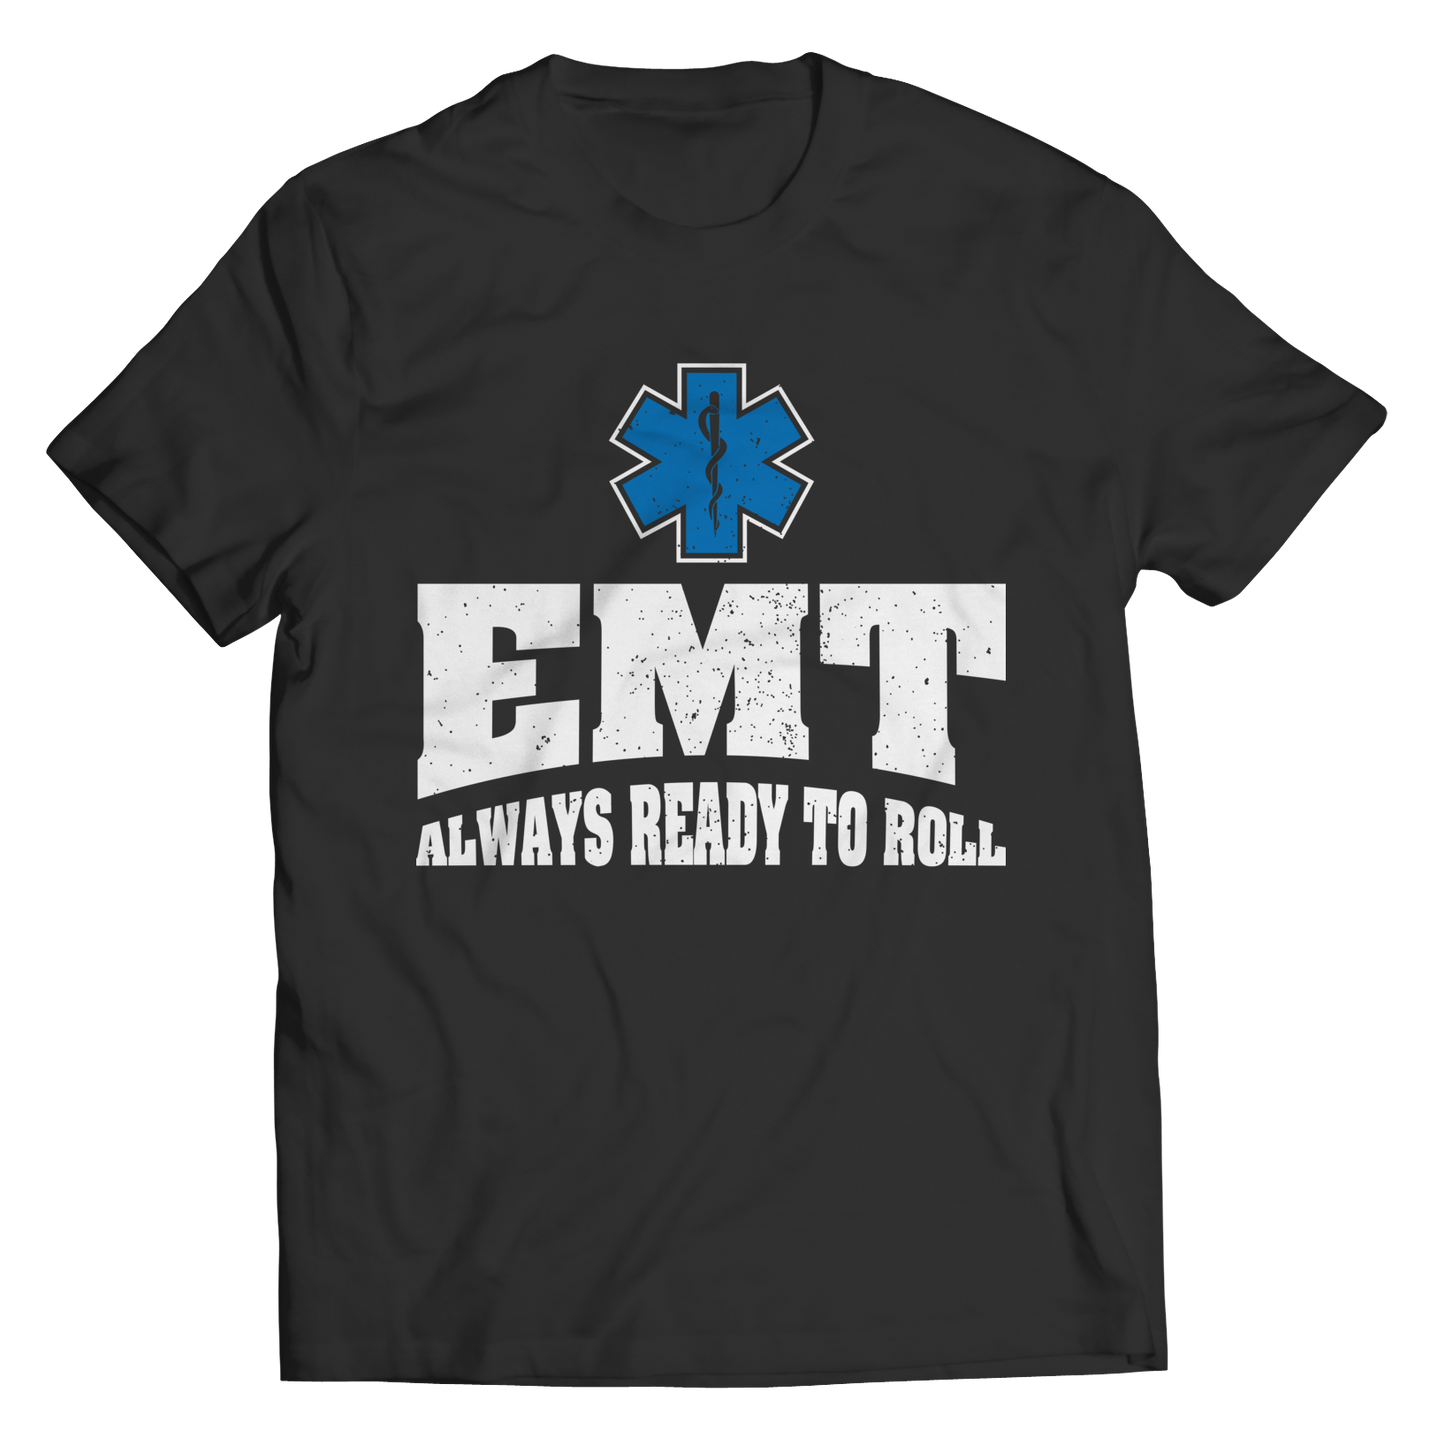 EMT Always Ready To Roll Tee Shirt